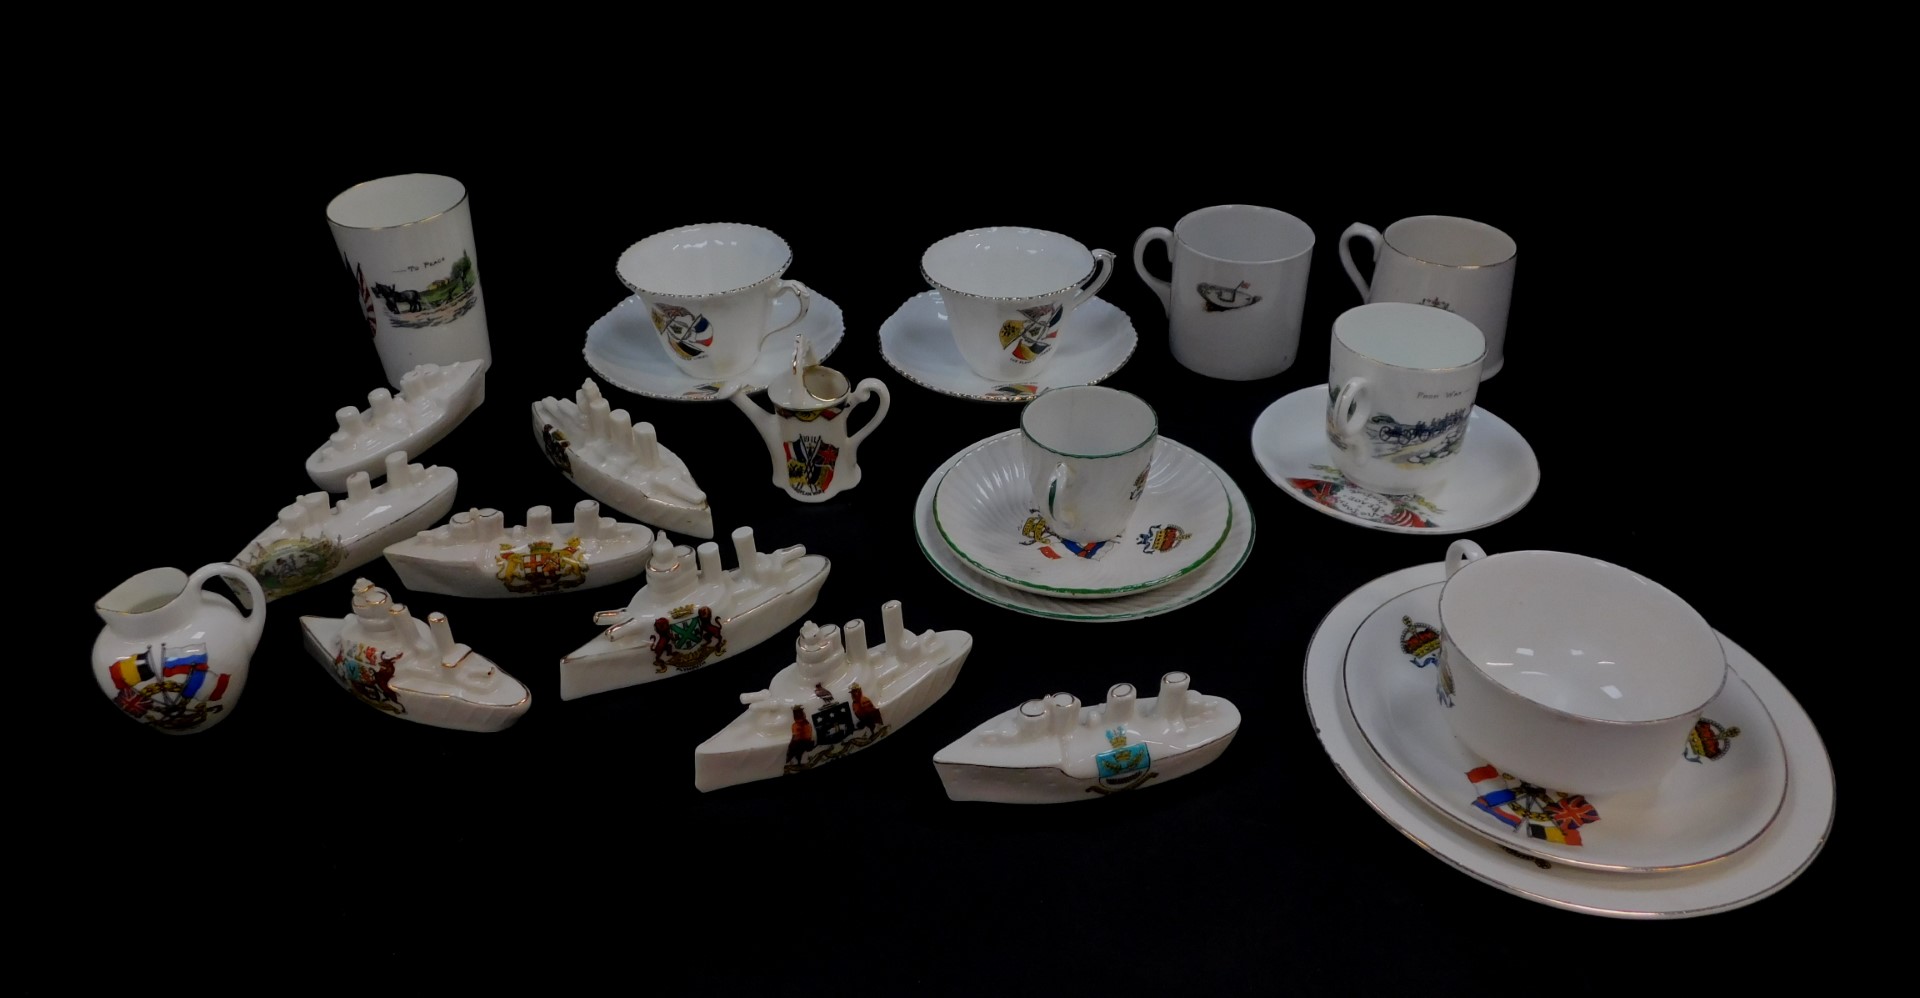 Eight crested china porcelain models of battle ships and other naval craft, crested and